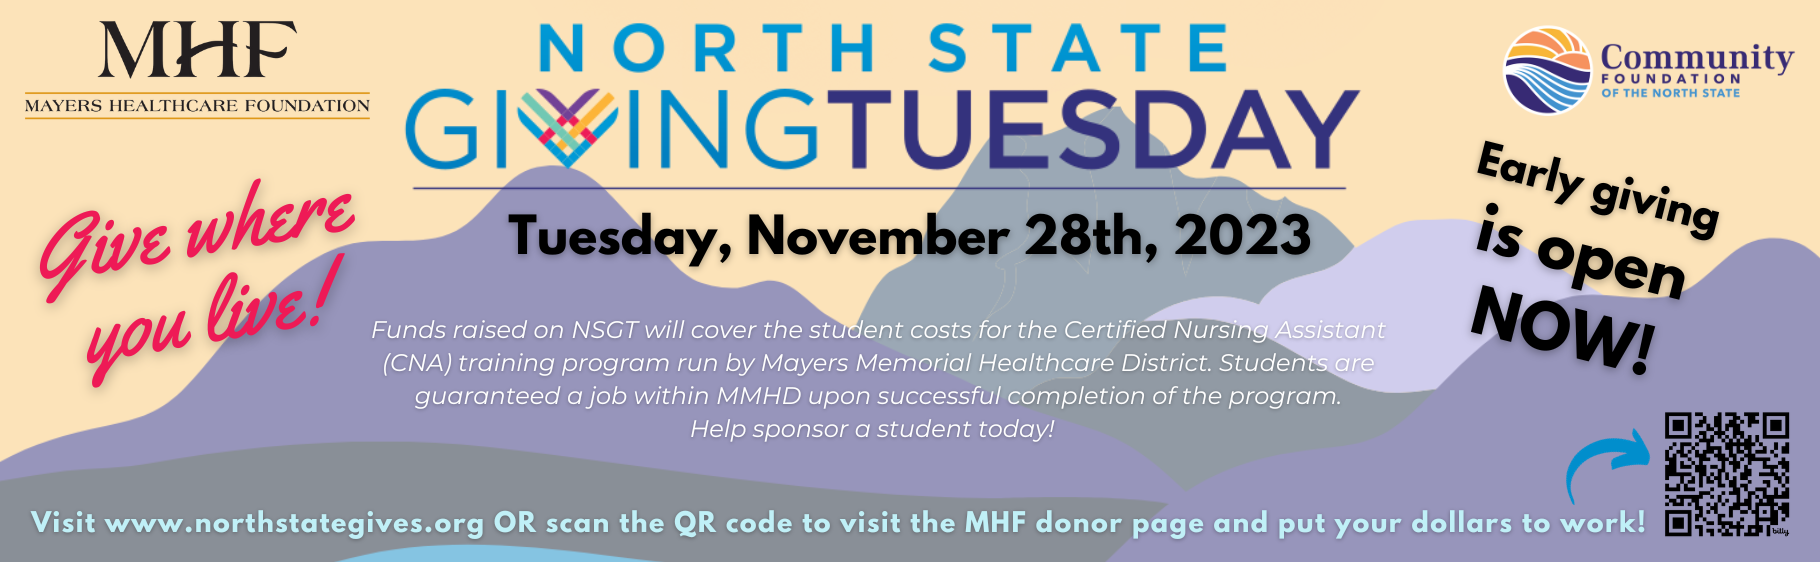 North State Giving Tuesday on November 28, 2023.